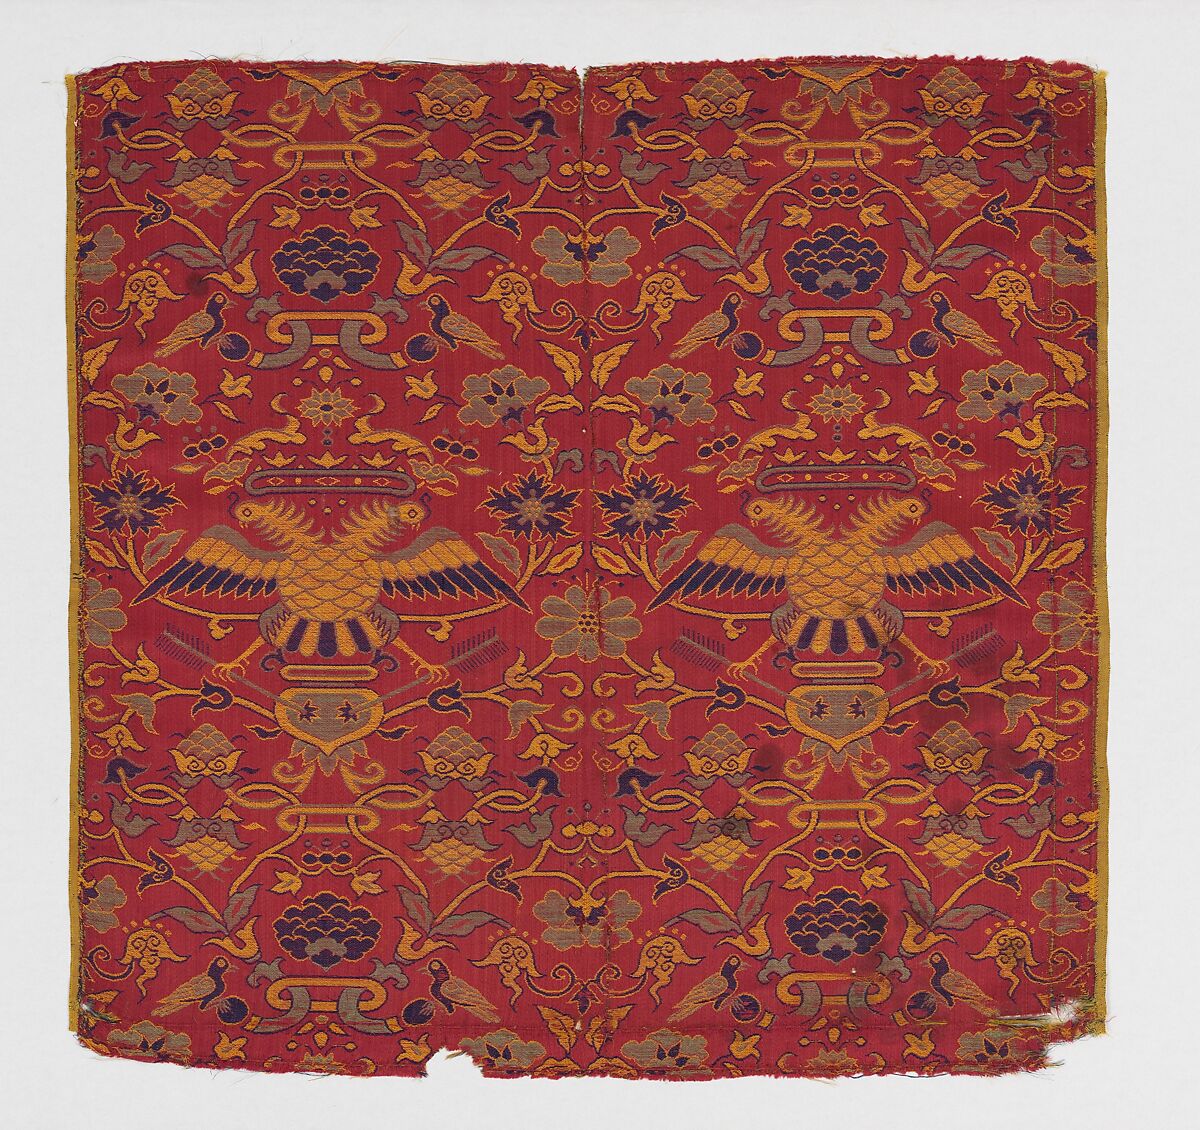 Textile with crowned double headed eagles, Lampas, silk, Chinese, Macao, for Iberian market 